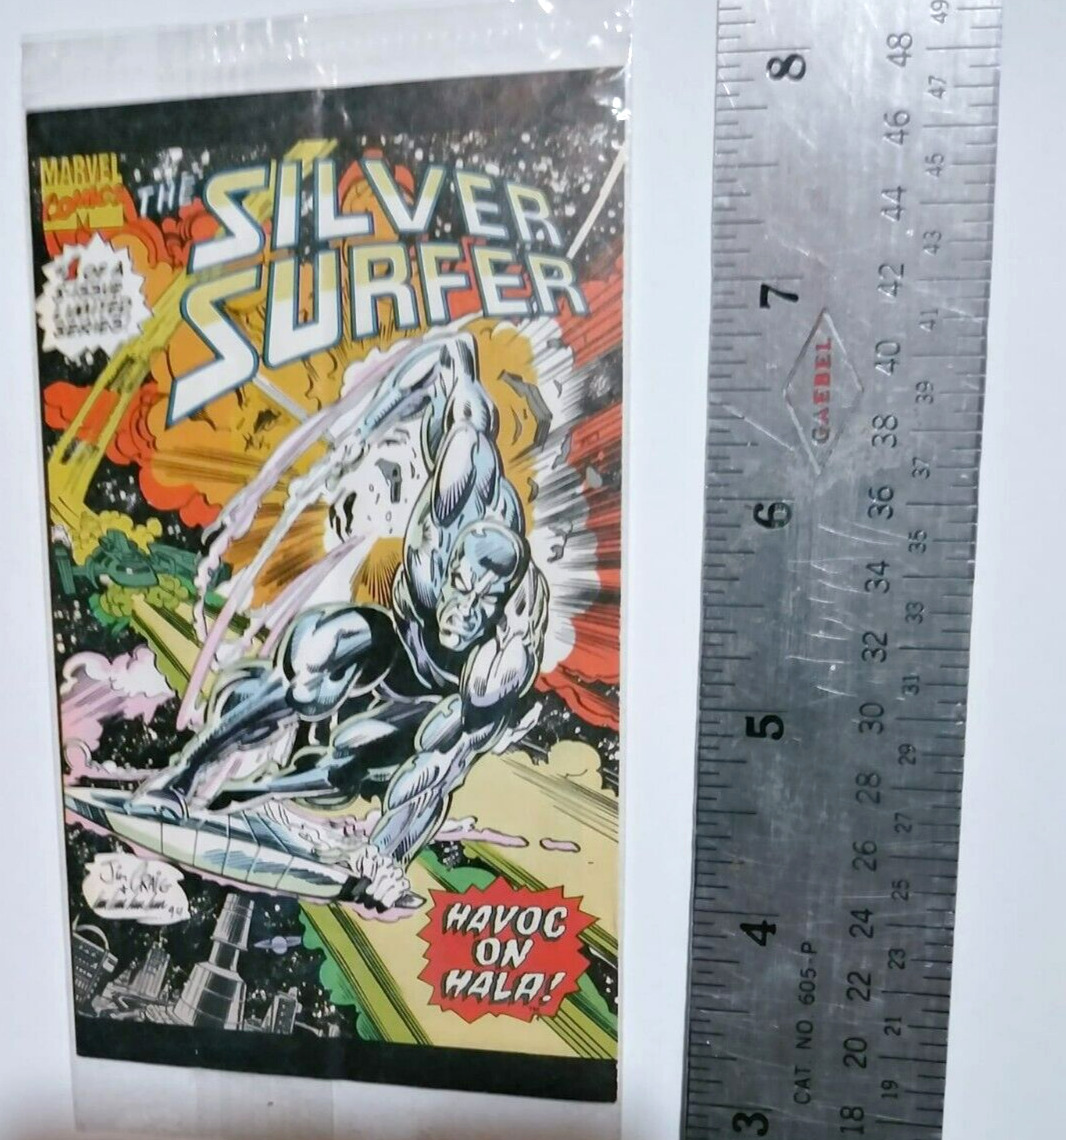 1994 MINI-COMIC SILVER SURFER #1 OF 5 MARVEL comics from a DRAKES SNACK box